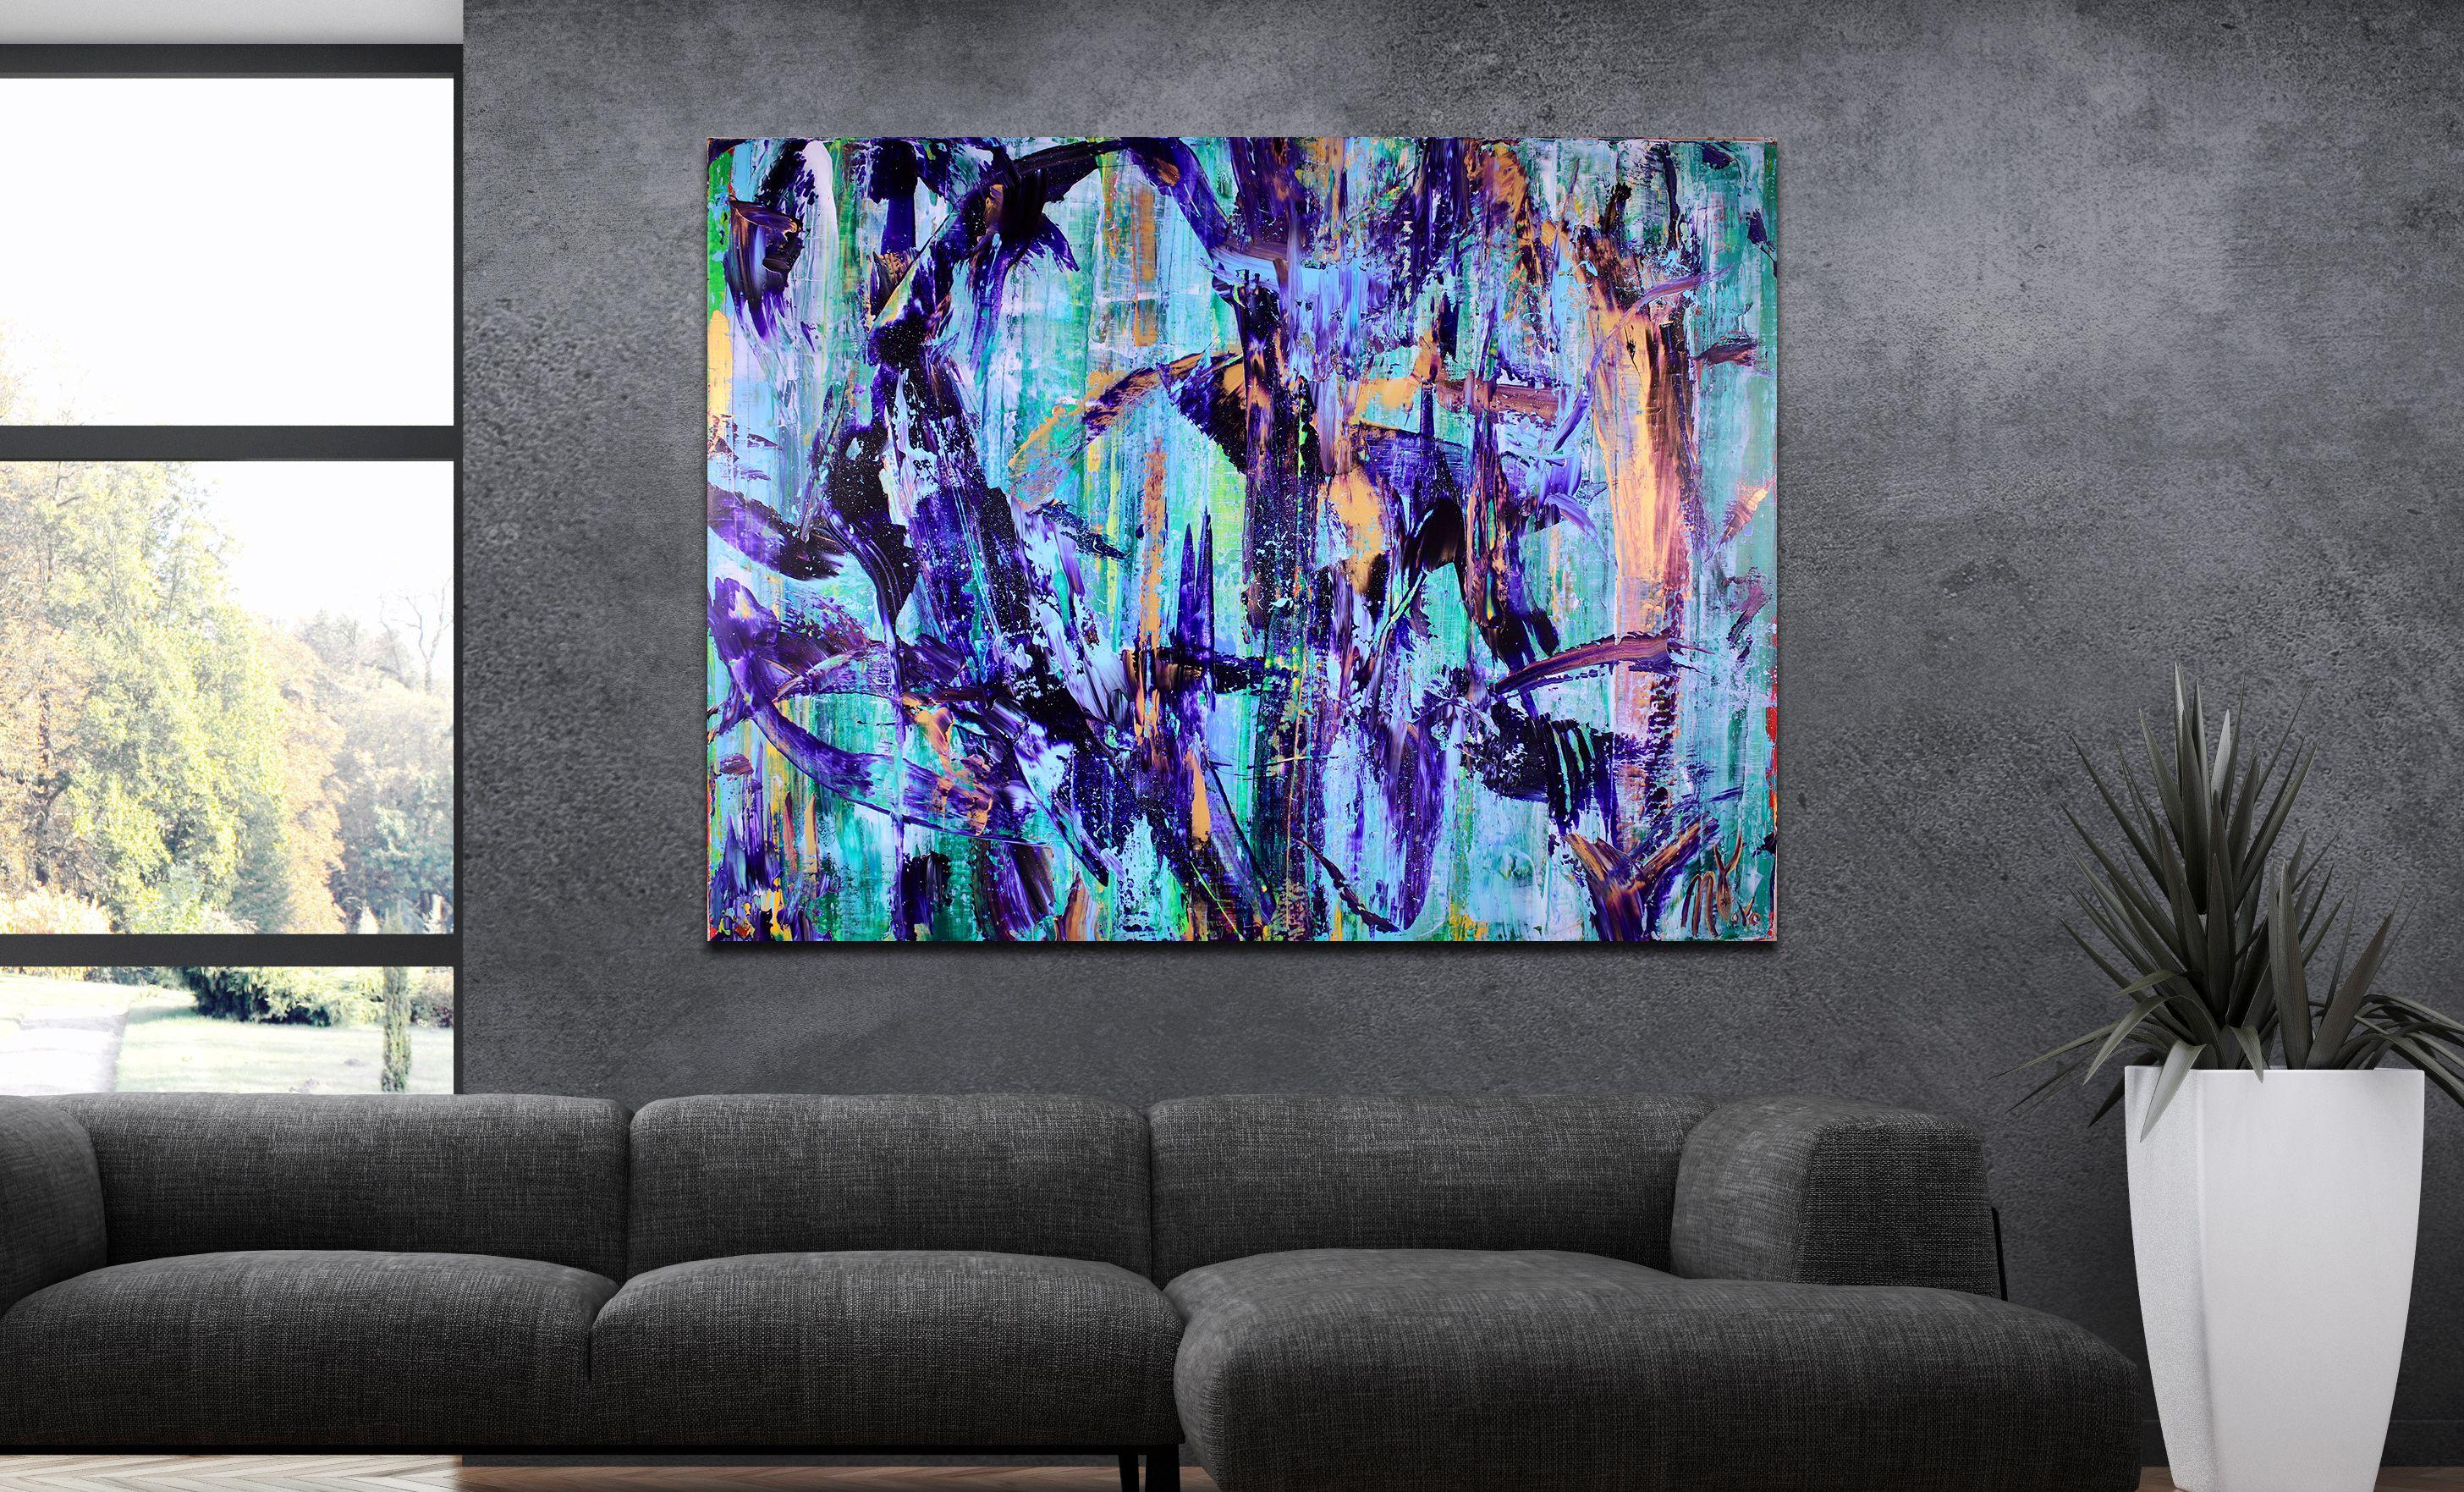 An explosion of iridescent colors, purple, blue, green, white and gold. Acrylic abstract signed and ready to hang.       ORIGINAL FINE ABSTRACTS - ONE OF A KIND!  I only make original works. Each is a one of a kind so you will have the only one! My